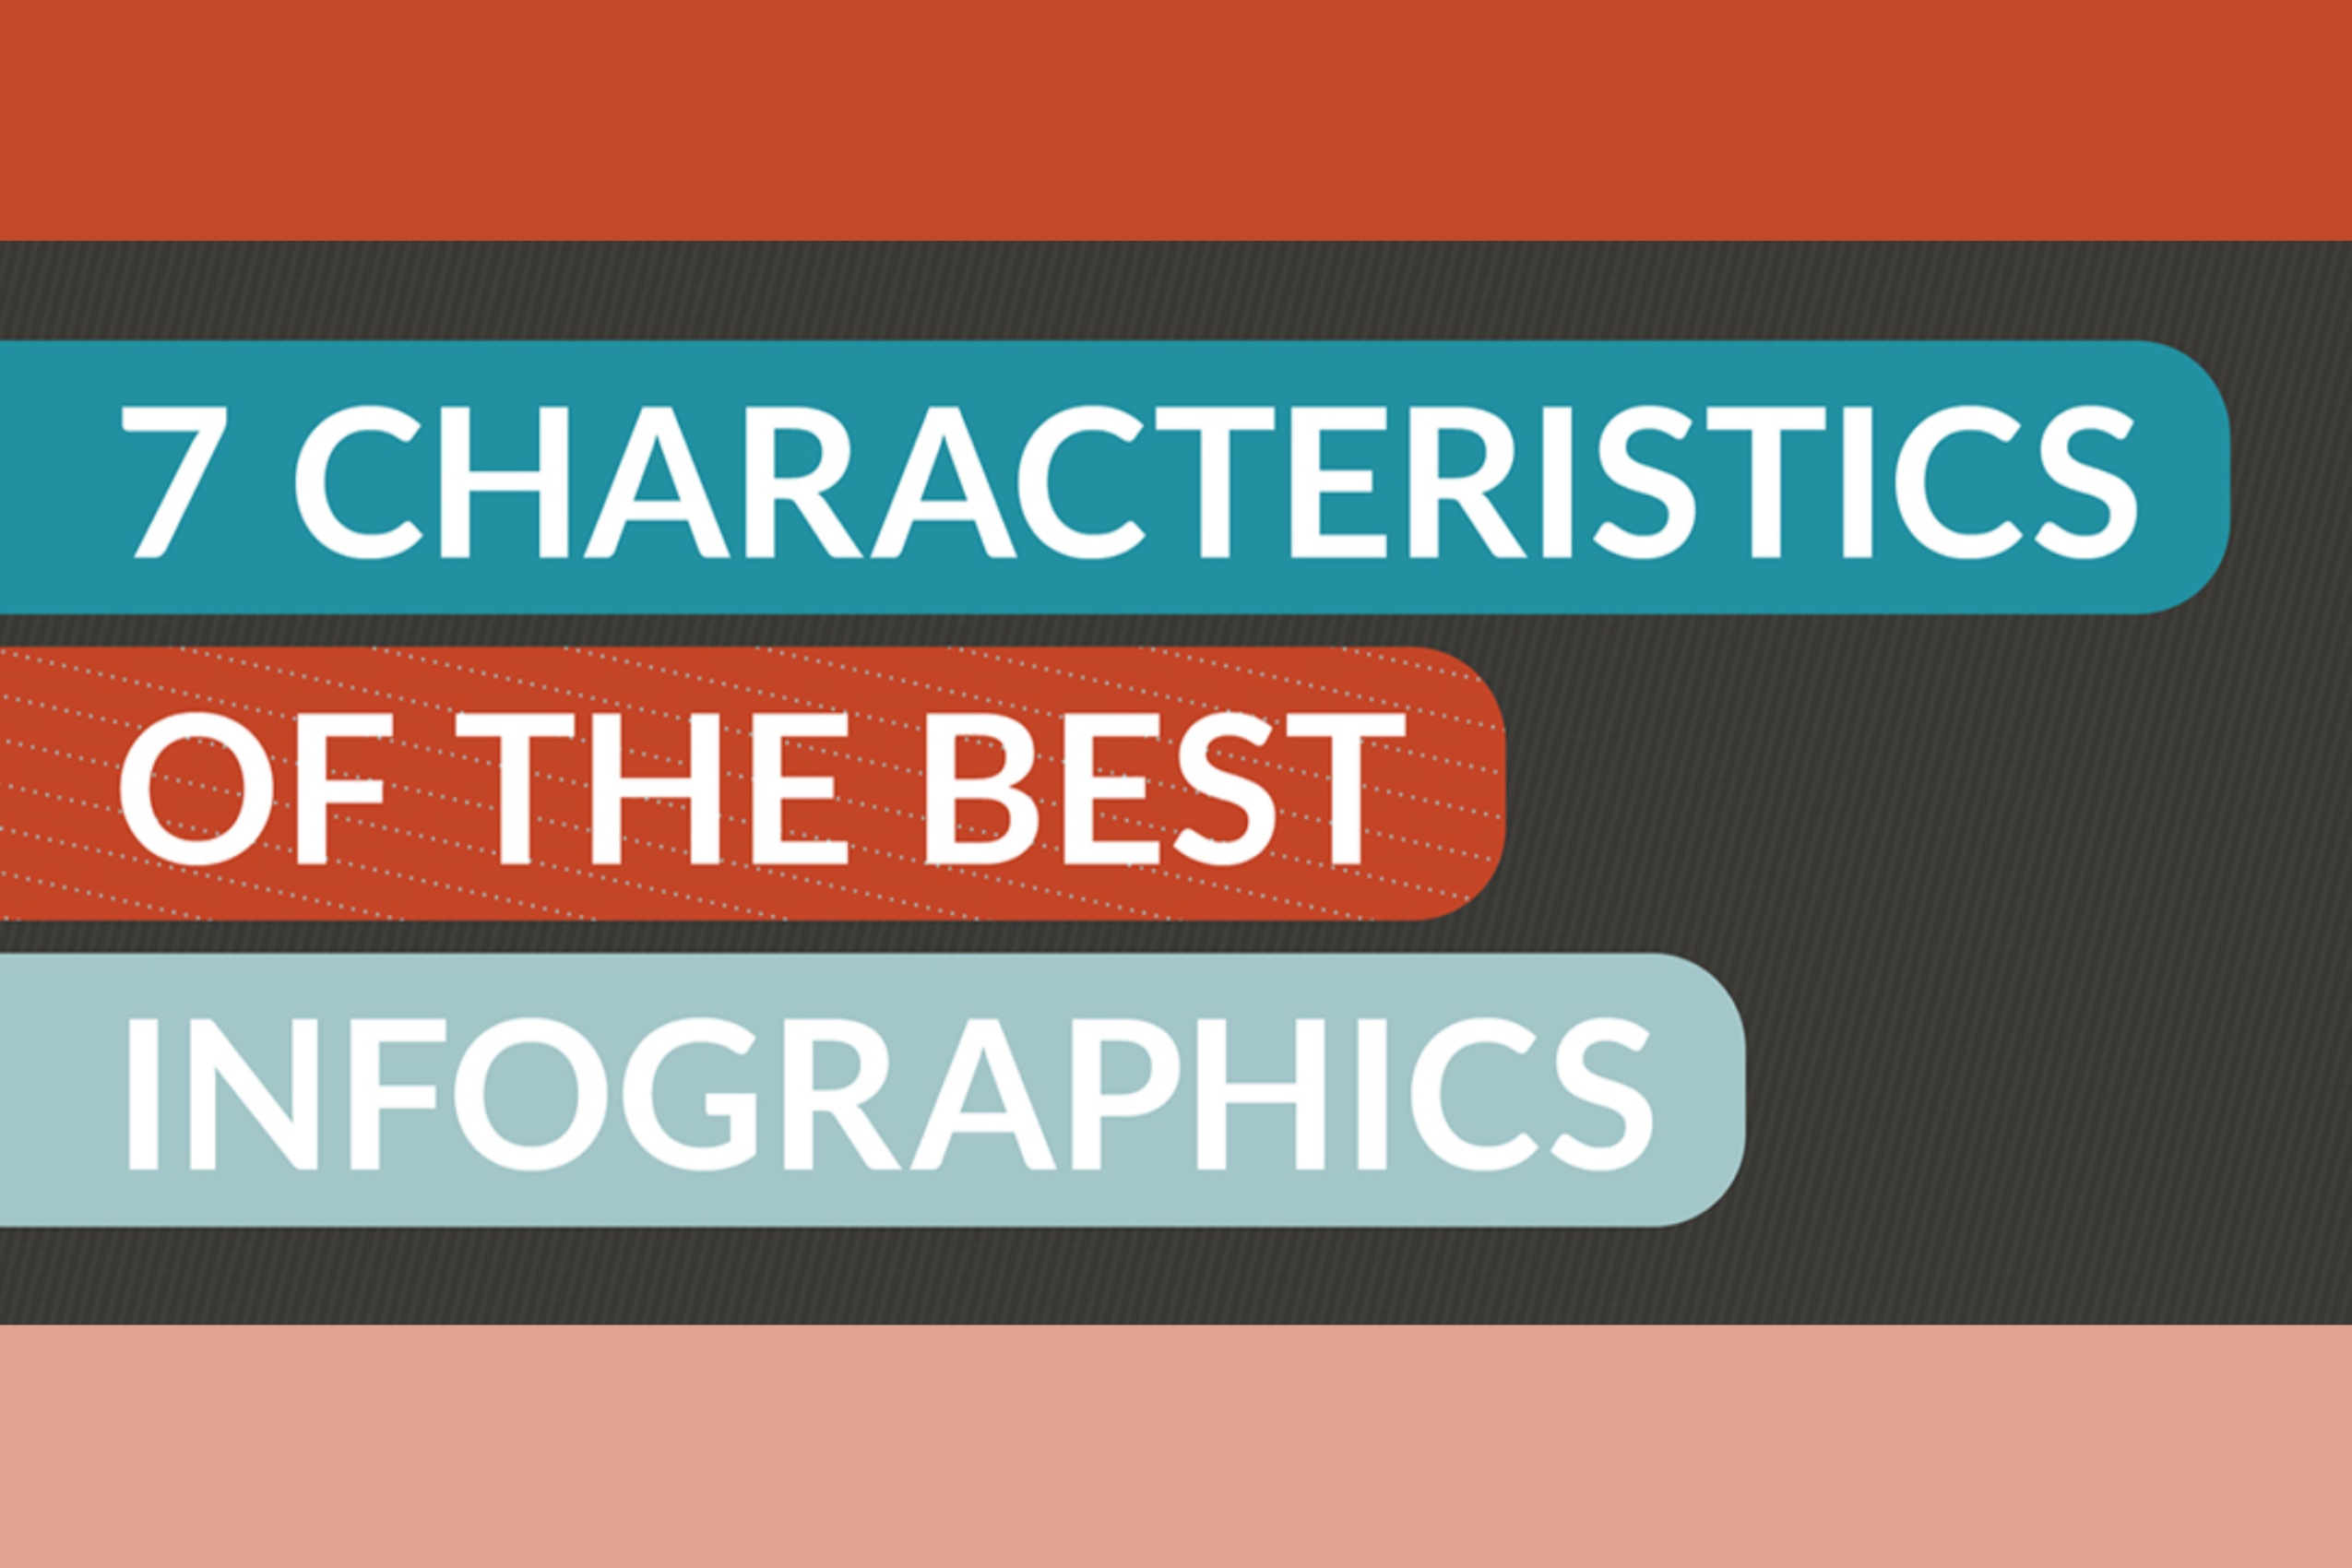 7 Characteristics Of The Best Infographics — In An Infographic!